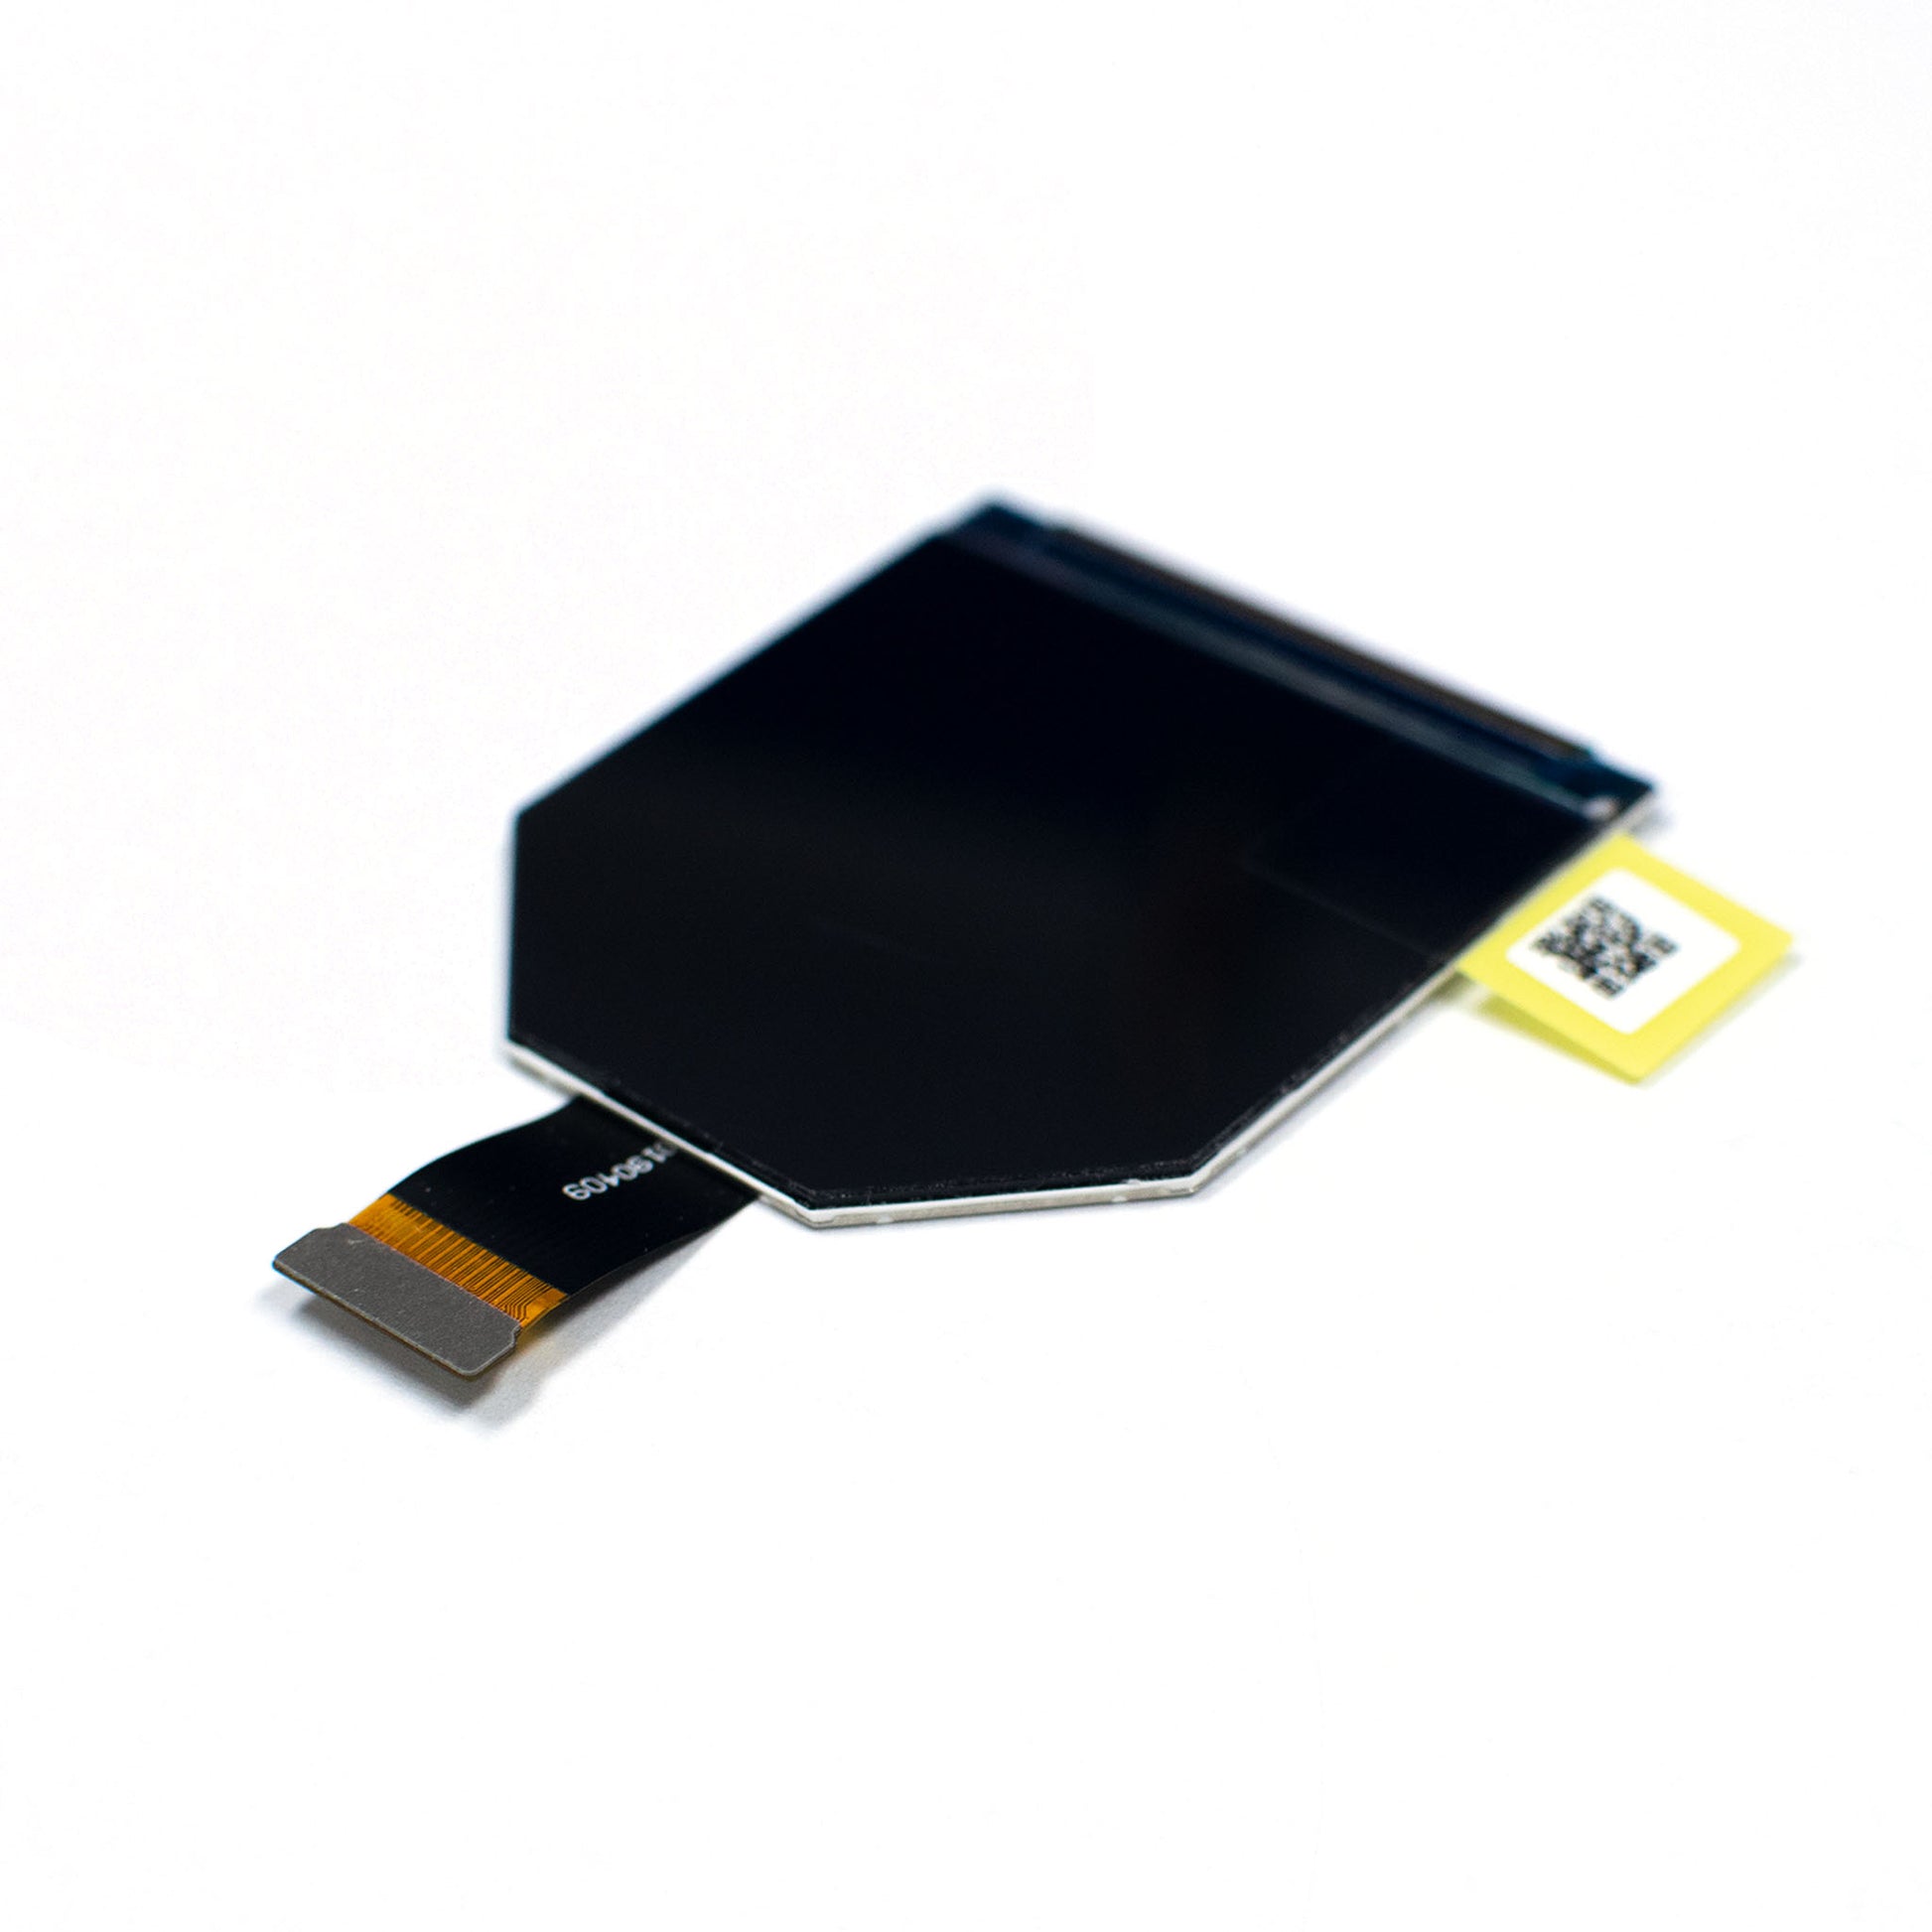 Top View of 2.1 inch TFT Micro Display Panel